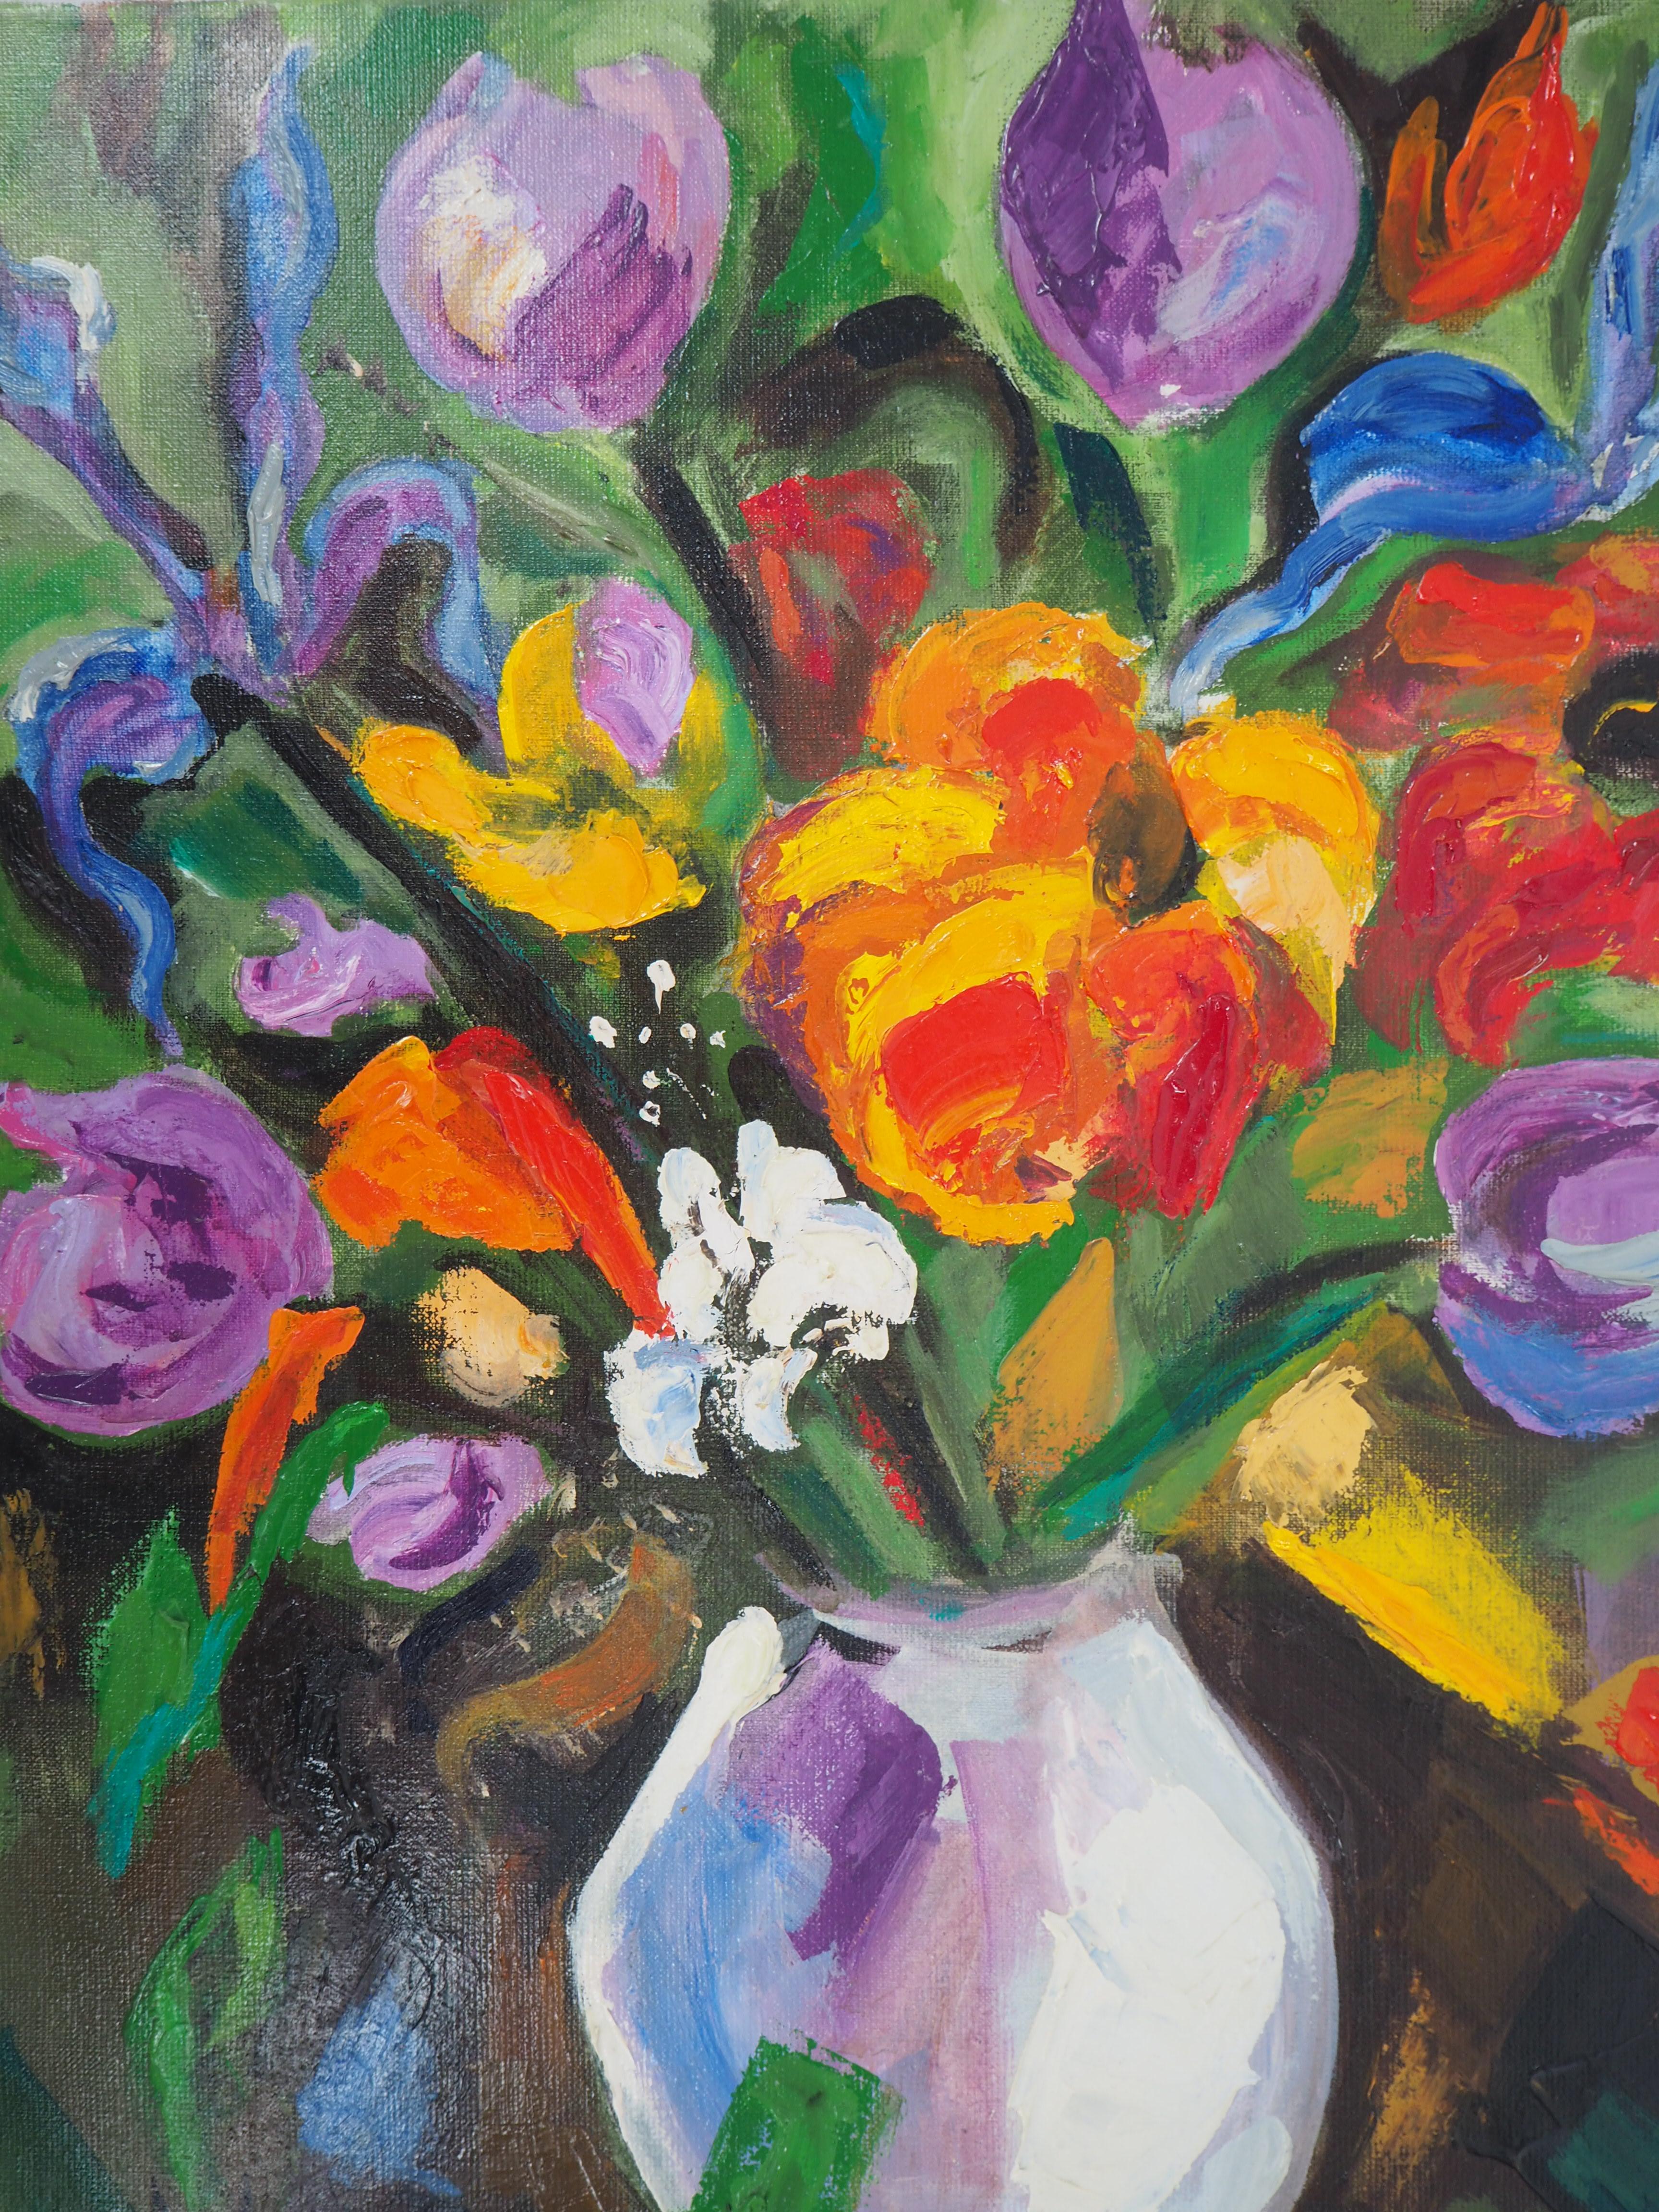 Bouquet of Tulips and Wild Flowers - Original Oil on Canvas, Signed - Painting by Pascal Ambrogiani